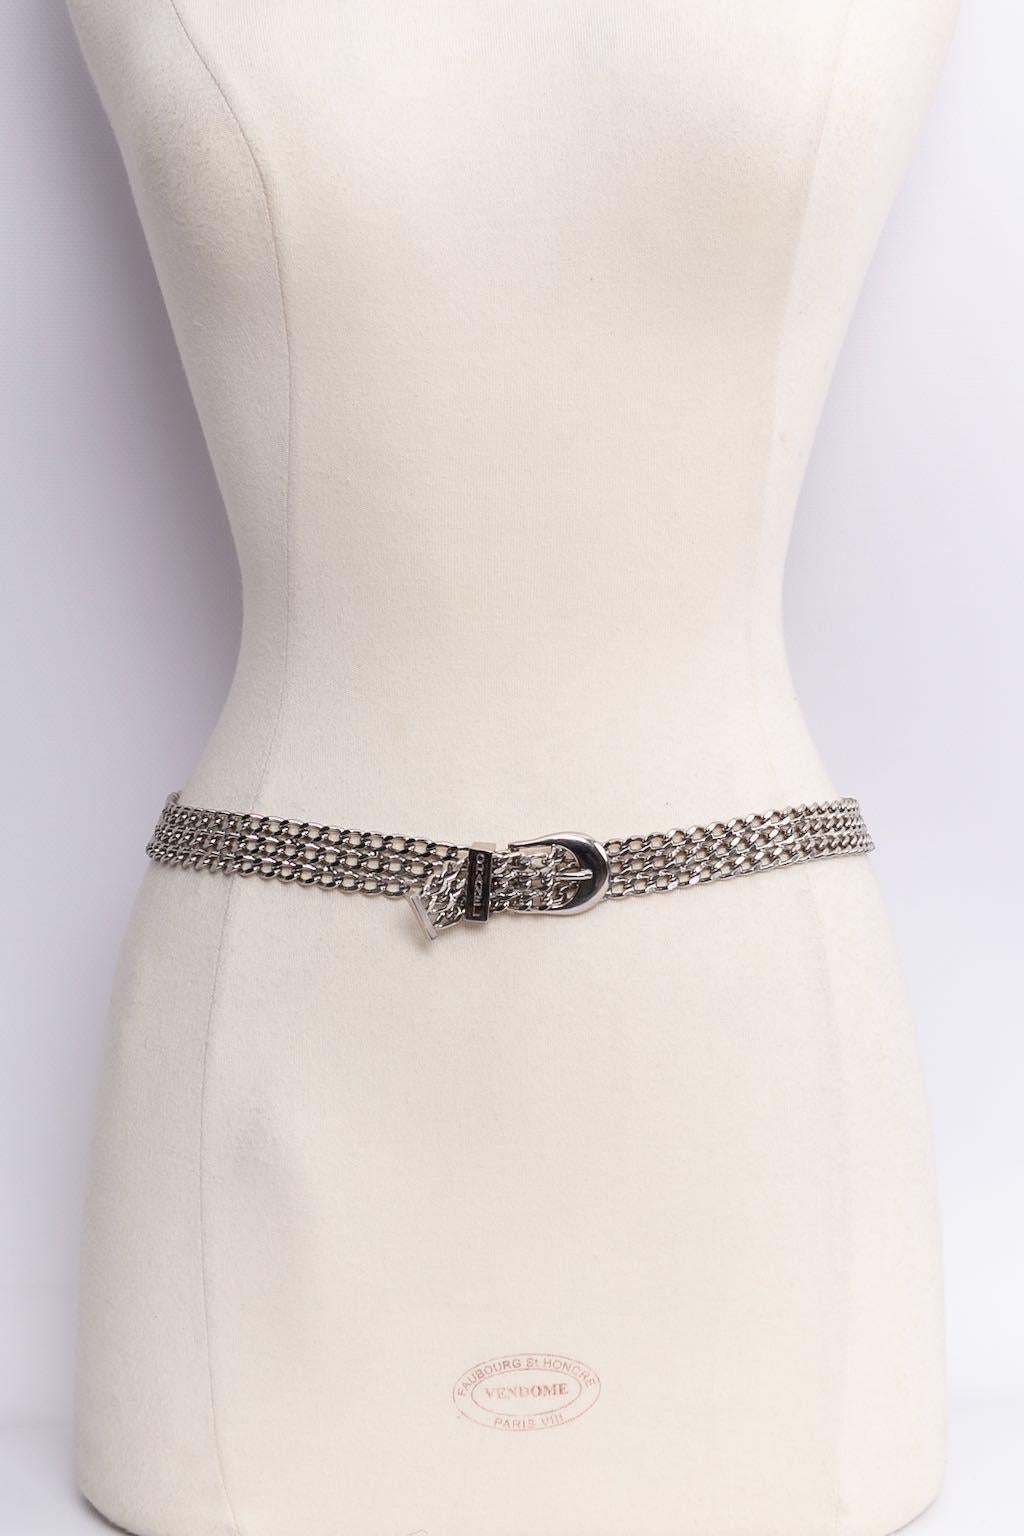 Chanel (Made in France) Silver plated flexible belt. Spring-Summer 1997 collection.

Additional information: 
Dimensions: Length: 75 cm (29.53 in) x Width: 2 cm (0.79 in)
Condition: Very good condition
Seller Ref number: CCB80